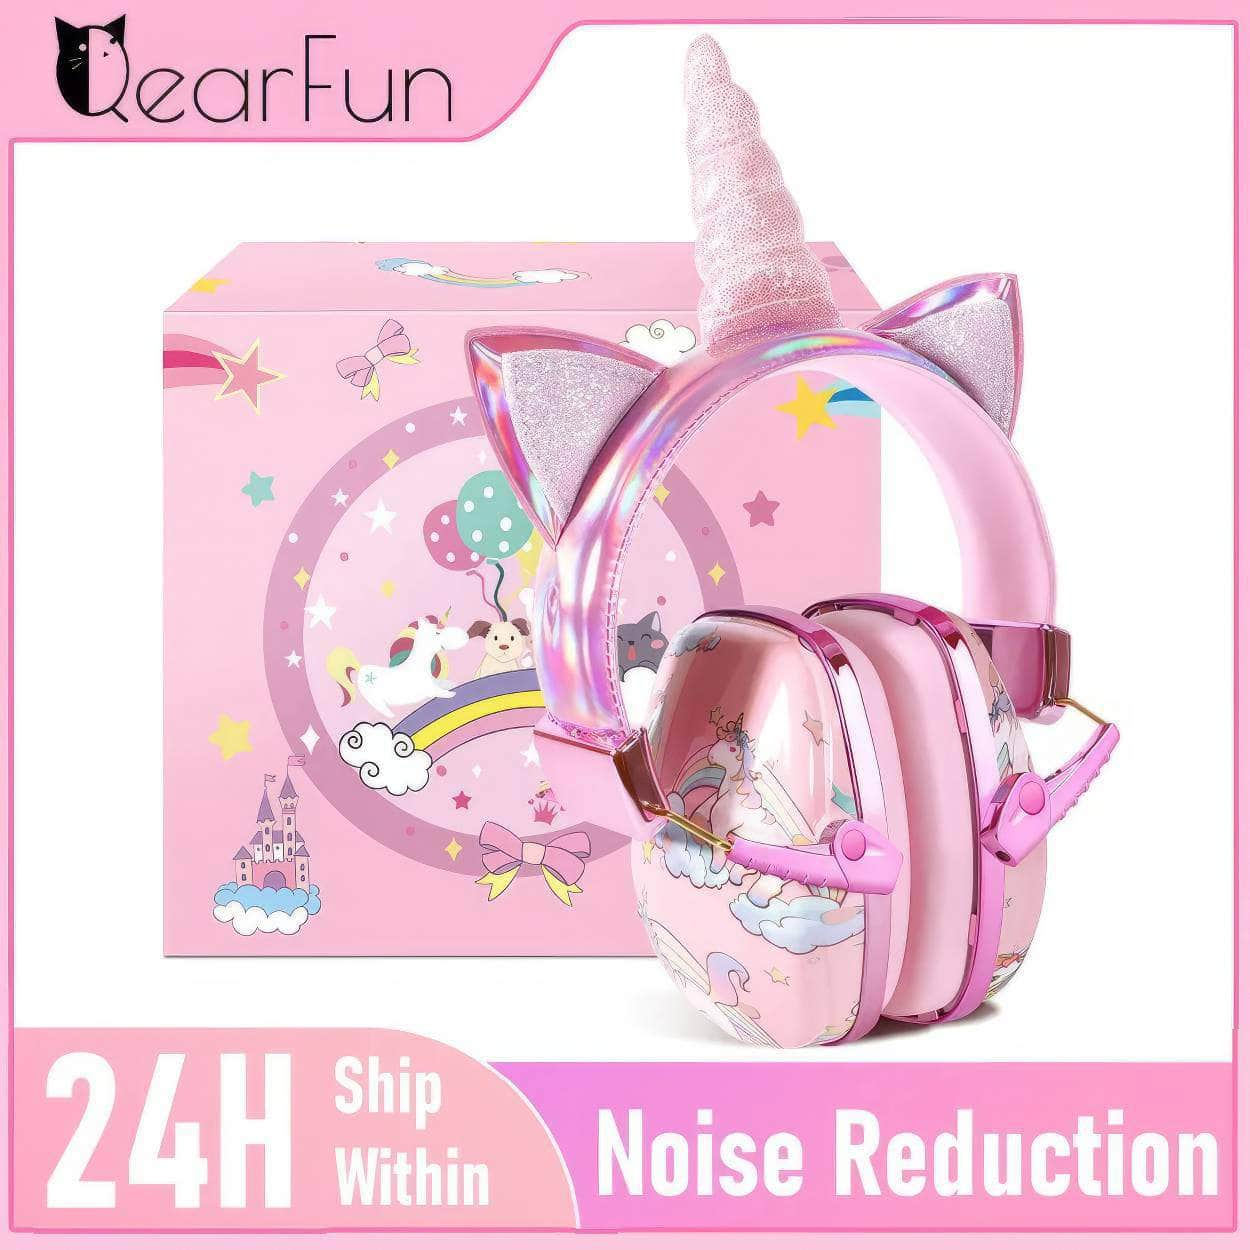 New Kid Earmuffs - Safety Ear Protectors for Children, 22dB Noise Protection, Noise Cancelling Headphones, Kids Gifts